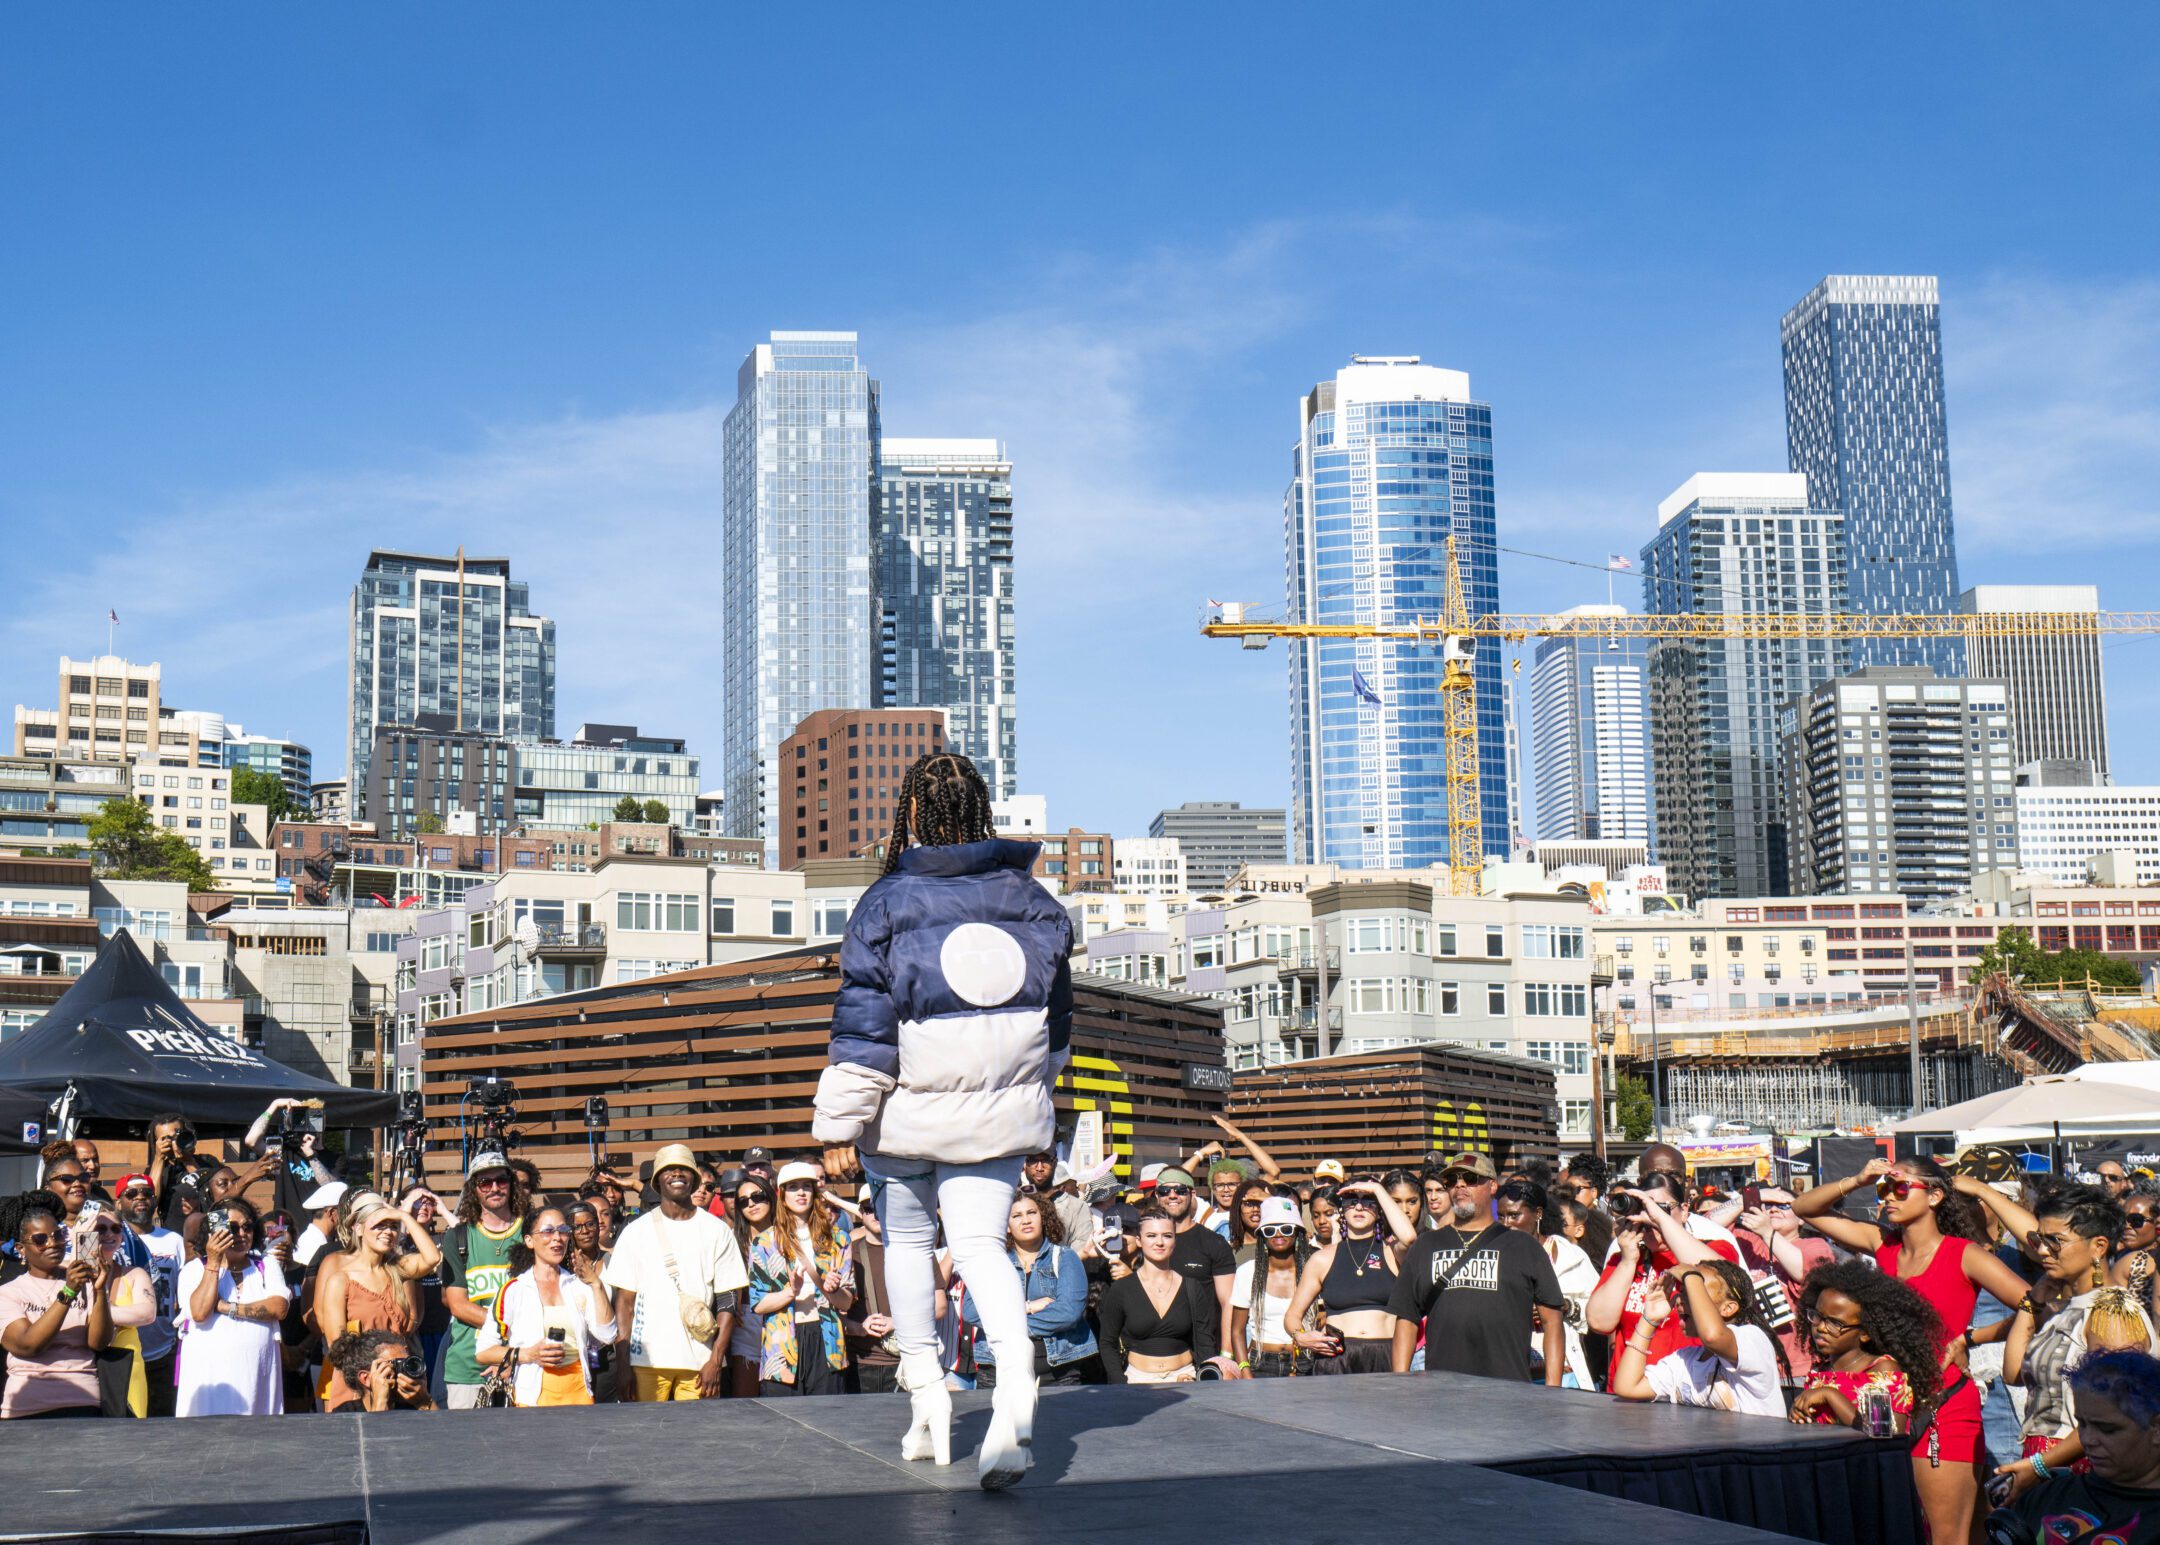 A woman in a blue and white coat and white patnts stands on stage in front of a crowd with the Seattle skyline behind her.